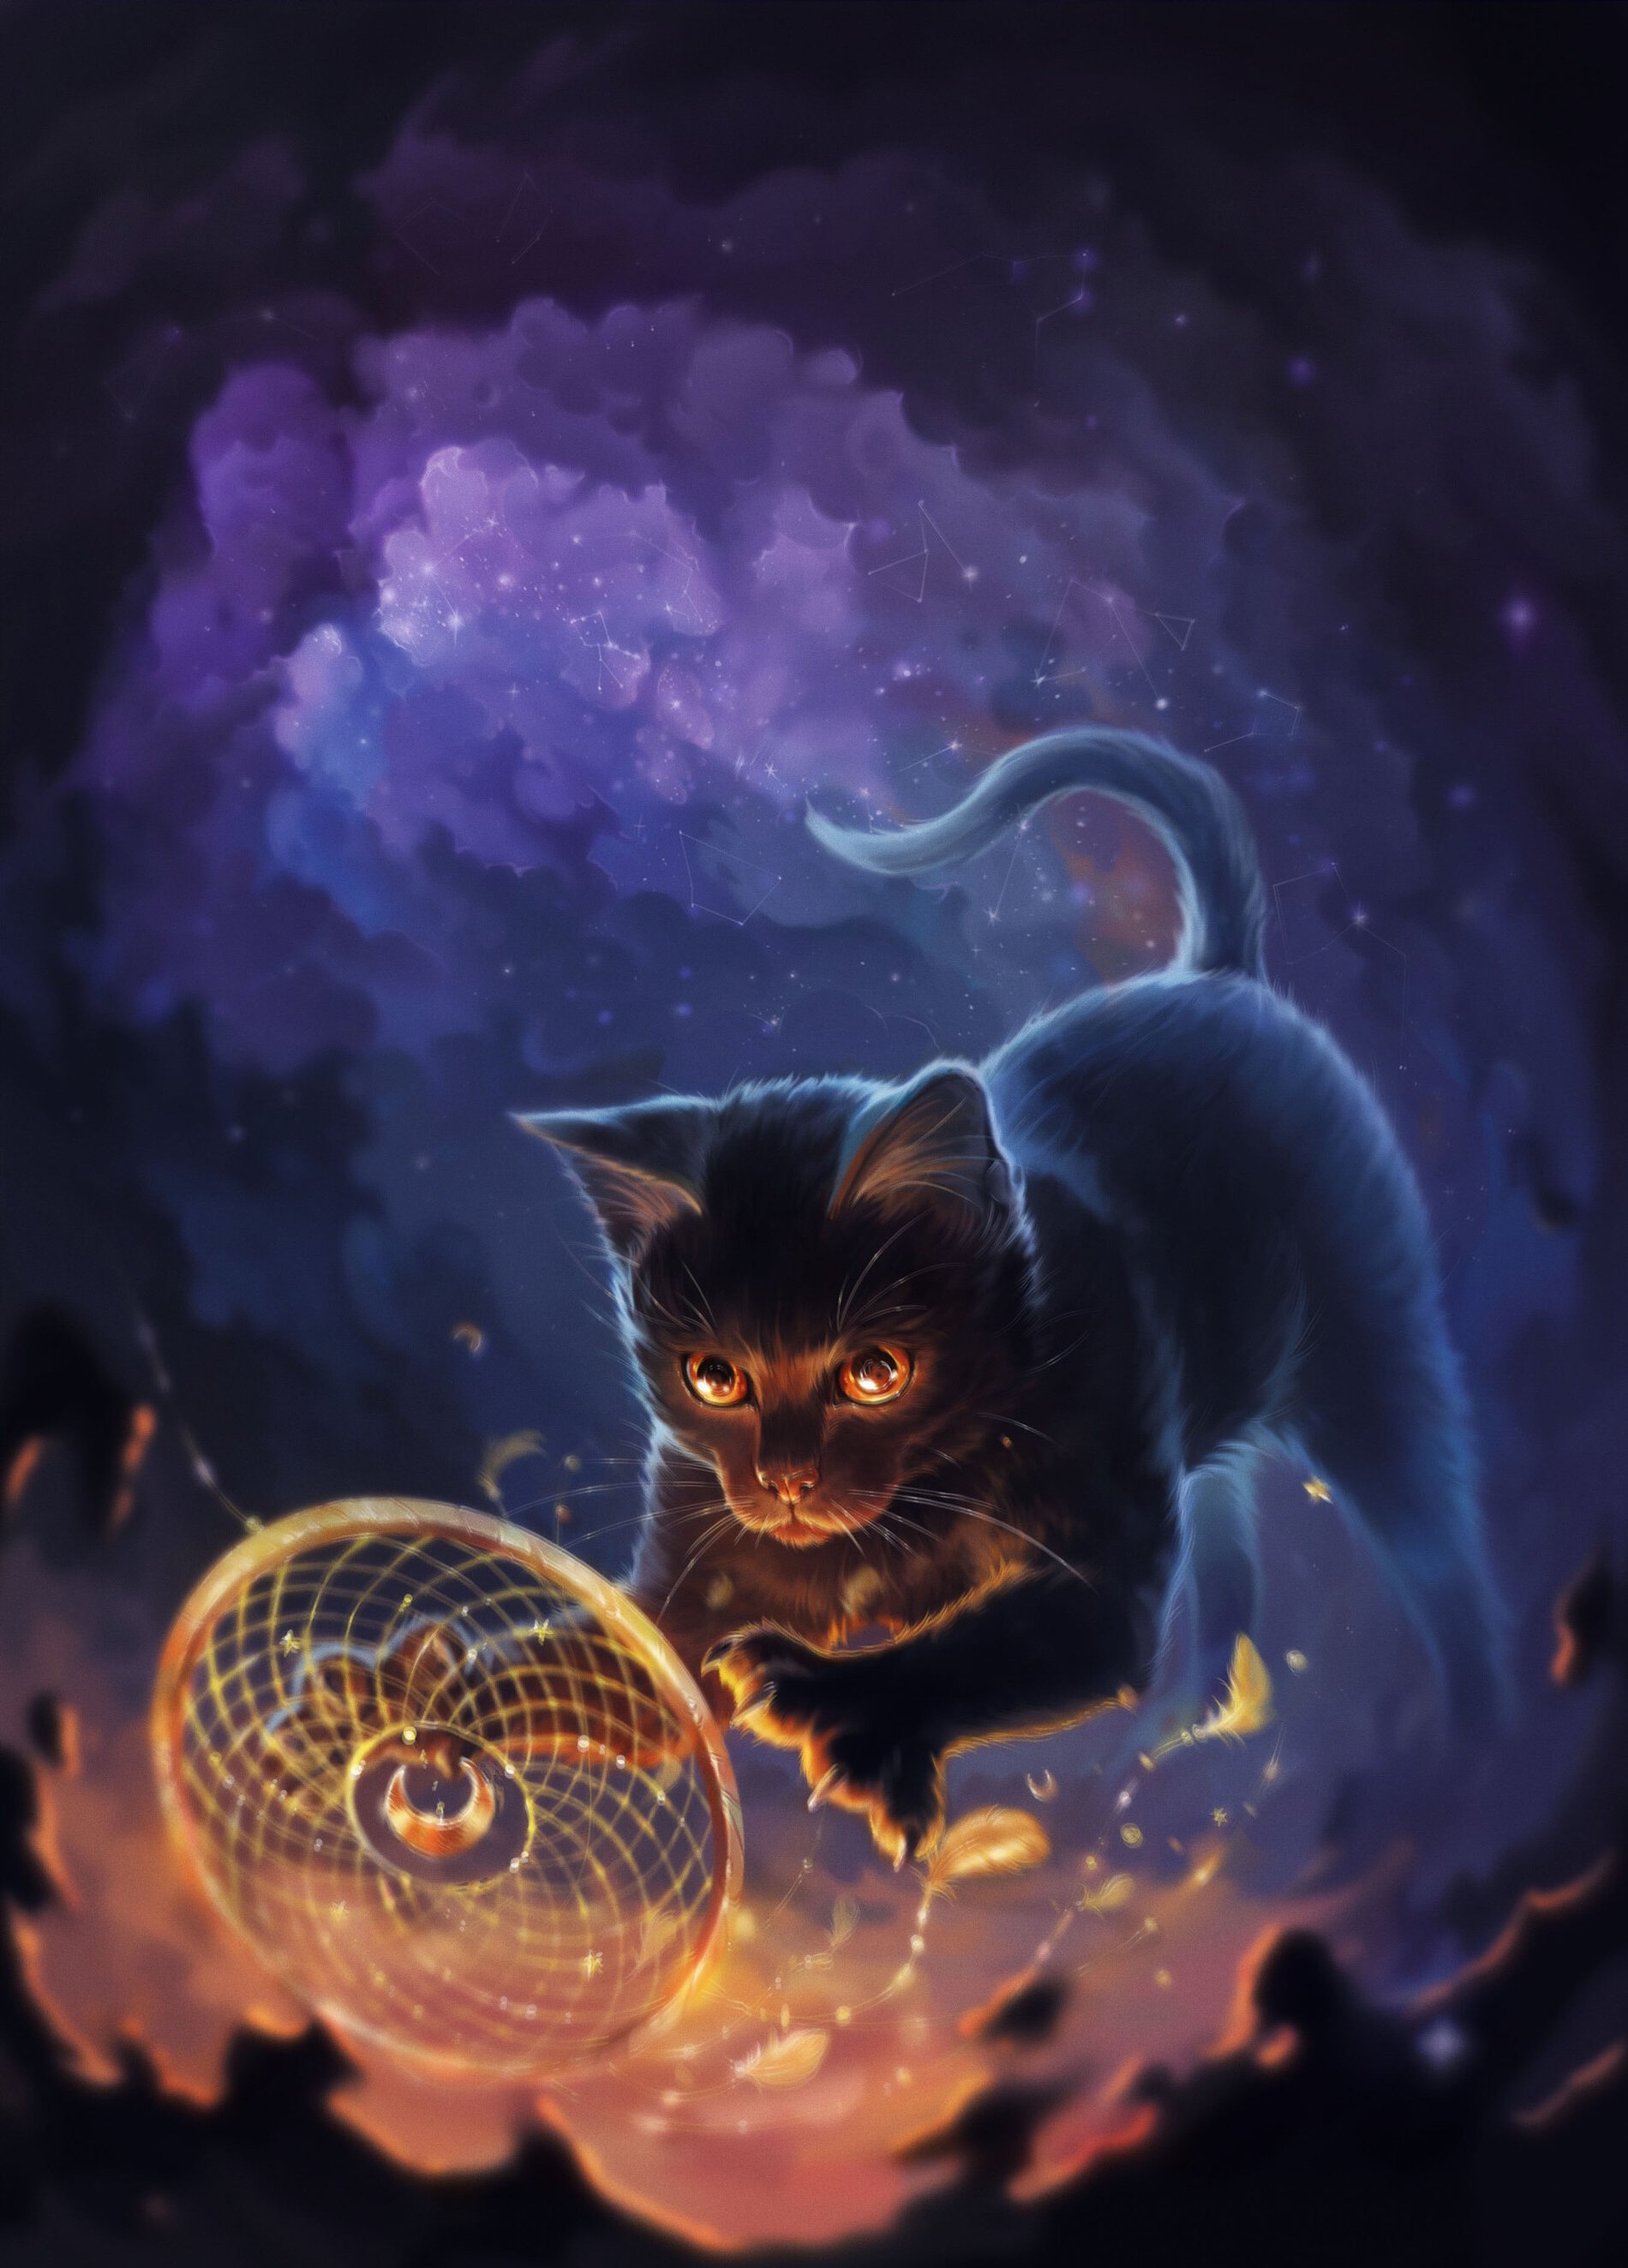 75327 download wallpaper dreamcatcher, art, feather, cat, dream catcher, mascot, talisman screensavers and pictures for free